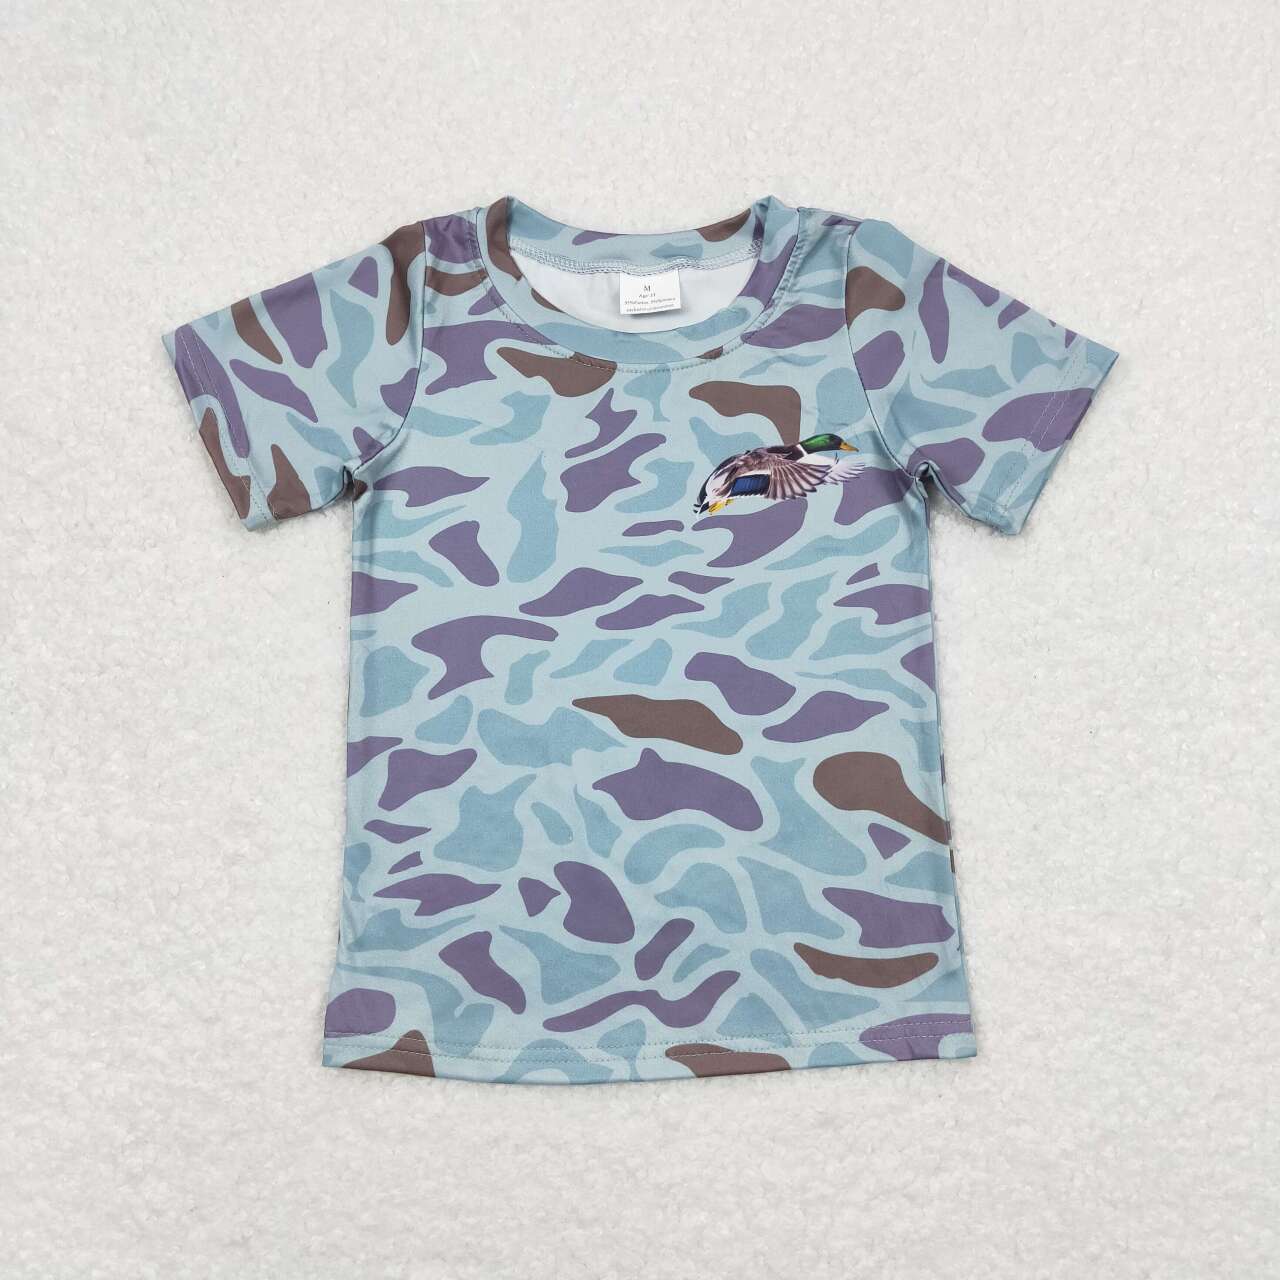 camo t-shirt with duck pattern boys top kids clothing